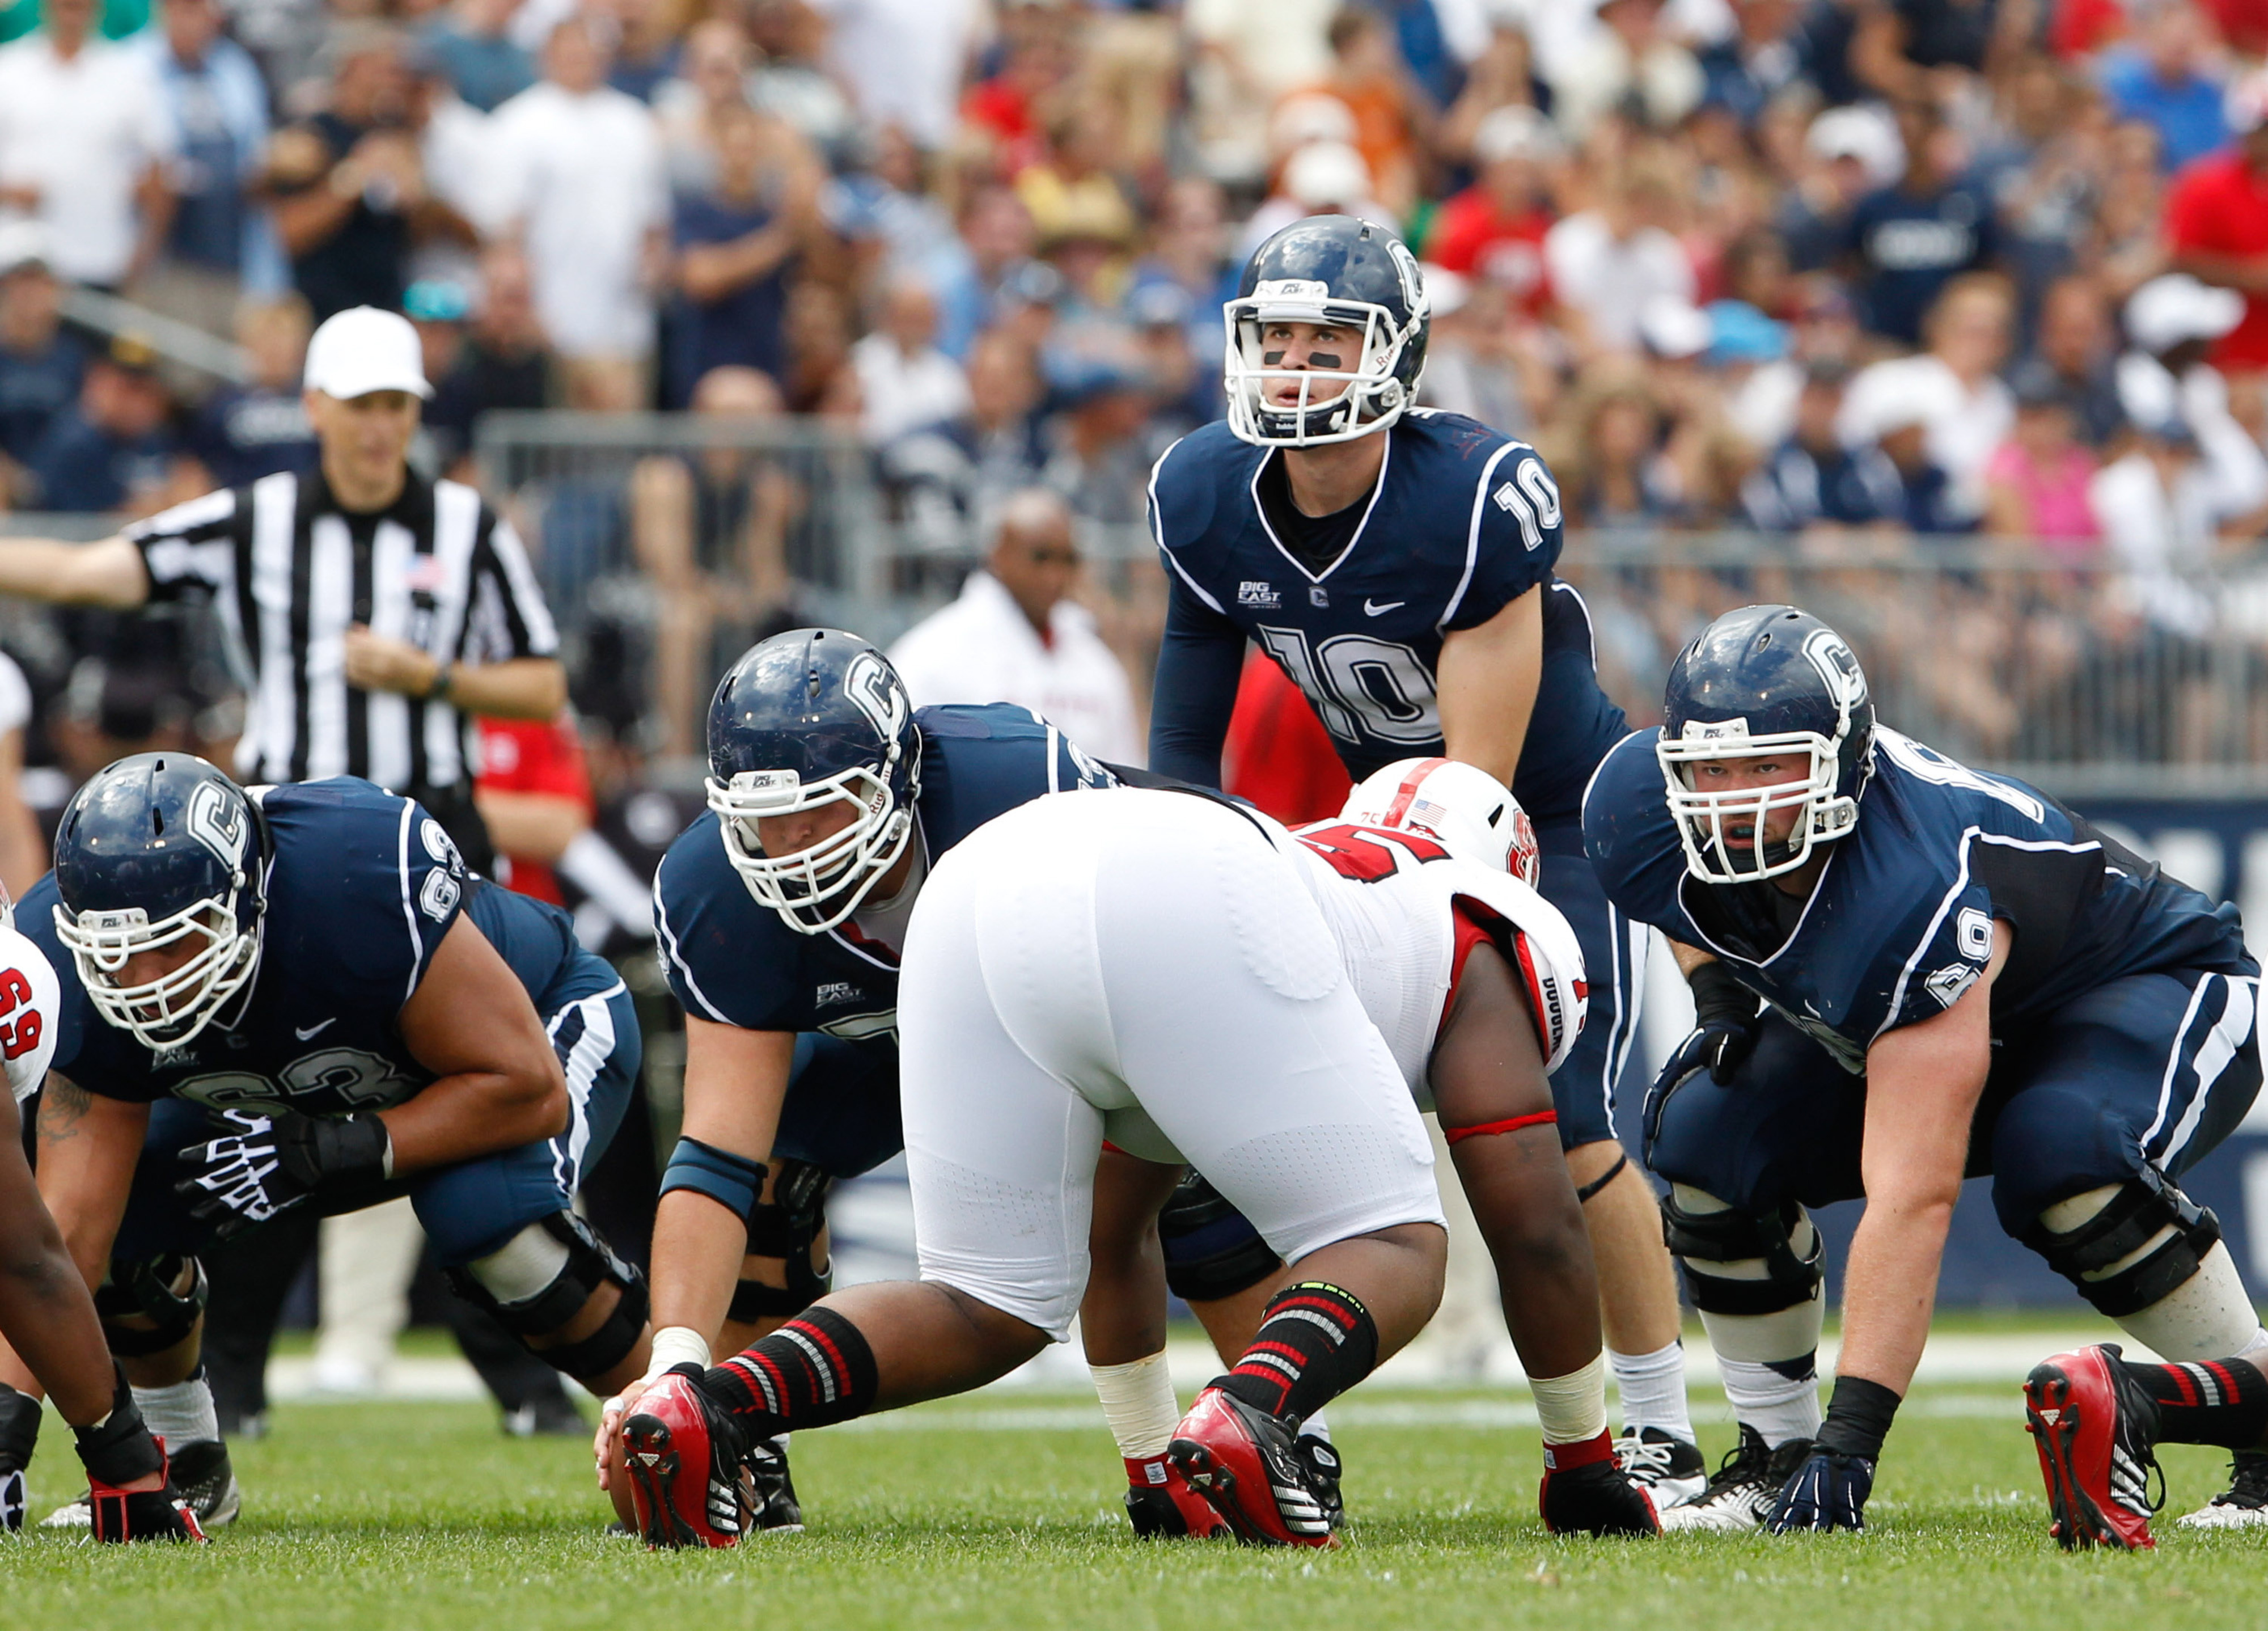 Sep 8, 2012; East Hartford, CT, USA; Connecticut Huskies quarterback Chandler Whitmer (10) at the line of scrimmage against the North Carolina State Wolfpack during the first half at Rentschler Field. Mandatory Credit: David Butler II-US PRESSWIRE